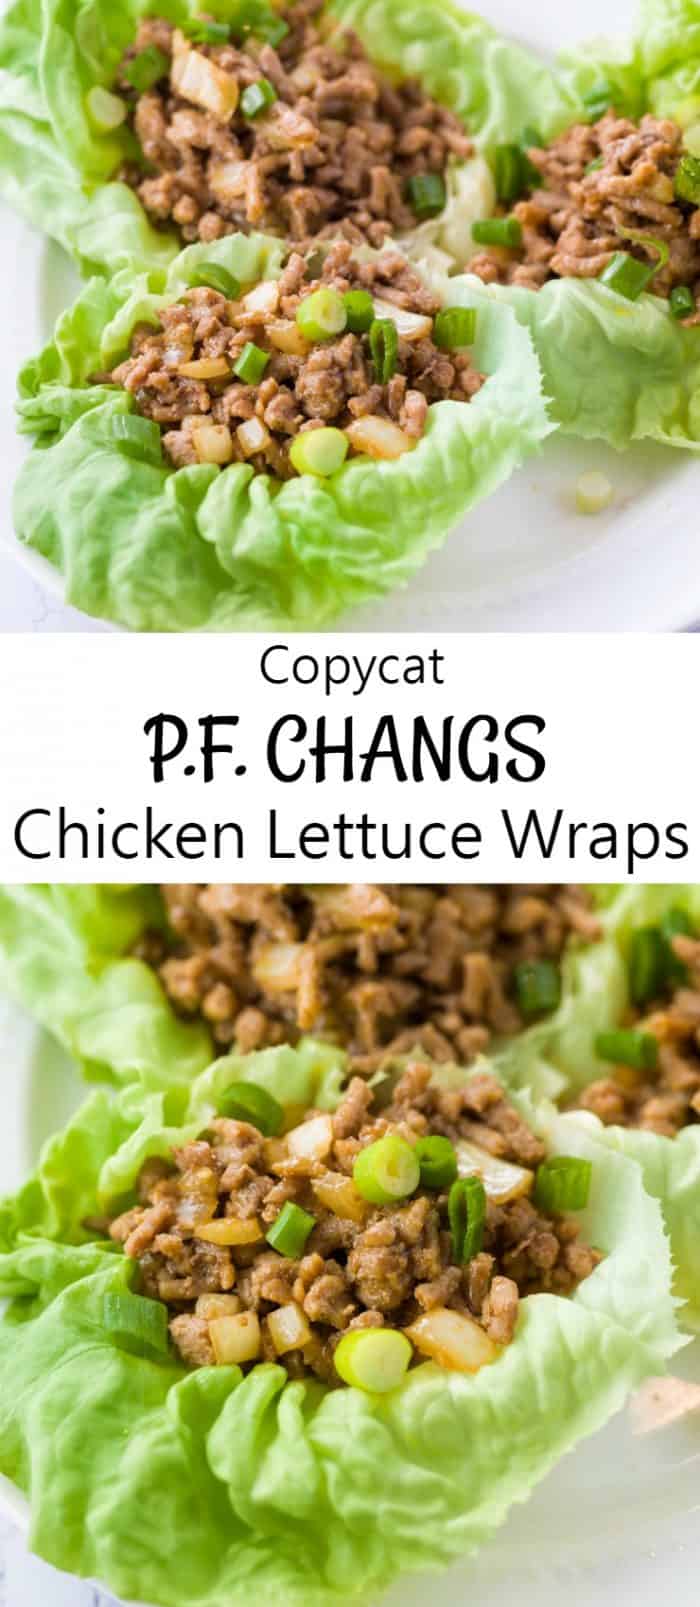 Ground chicken and a savory combination of Asian flavors served in a cool and crunchy lettuce wrap and ready in just 20 minutes! | The Cozy Cook | #copycat #PFChangs #chicken #lettuce #healthy #recipe #protein #lettucewrap